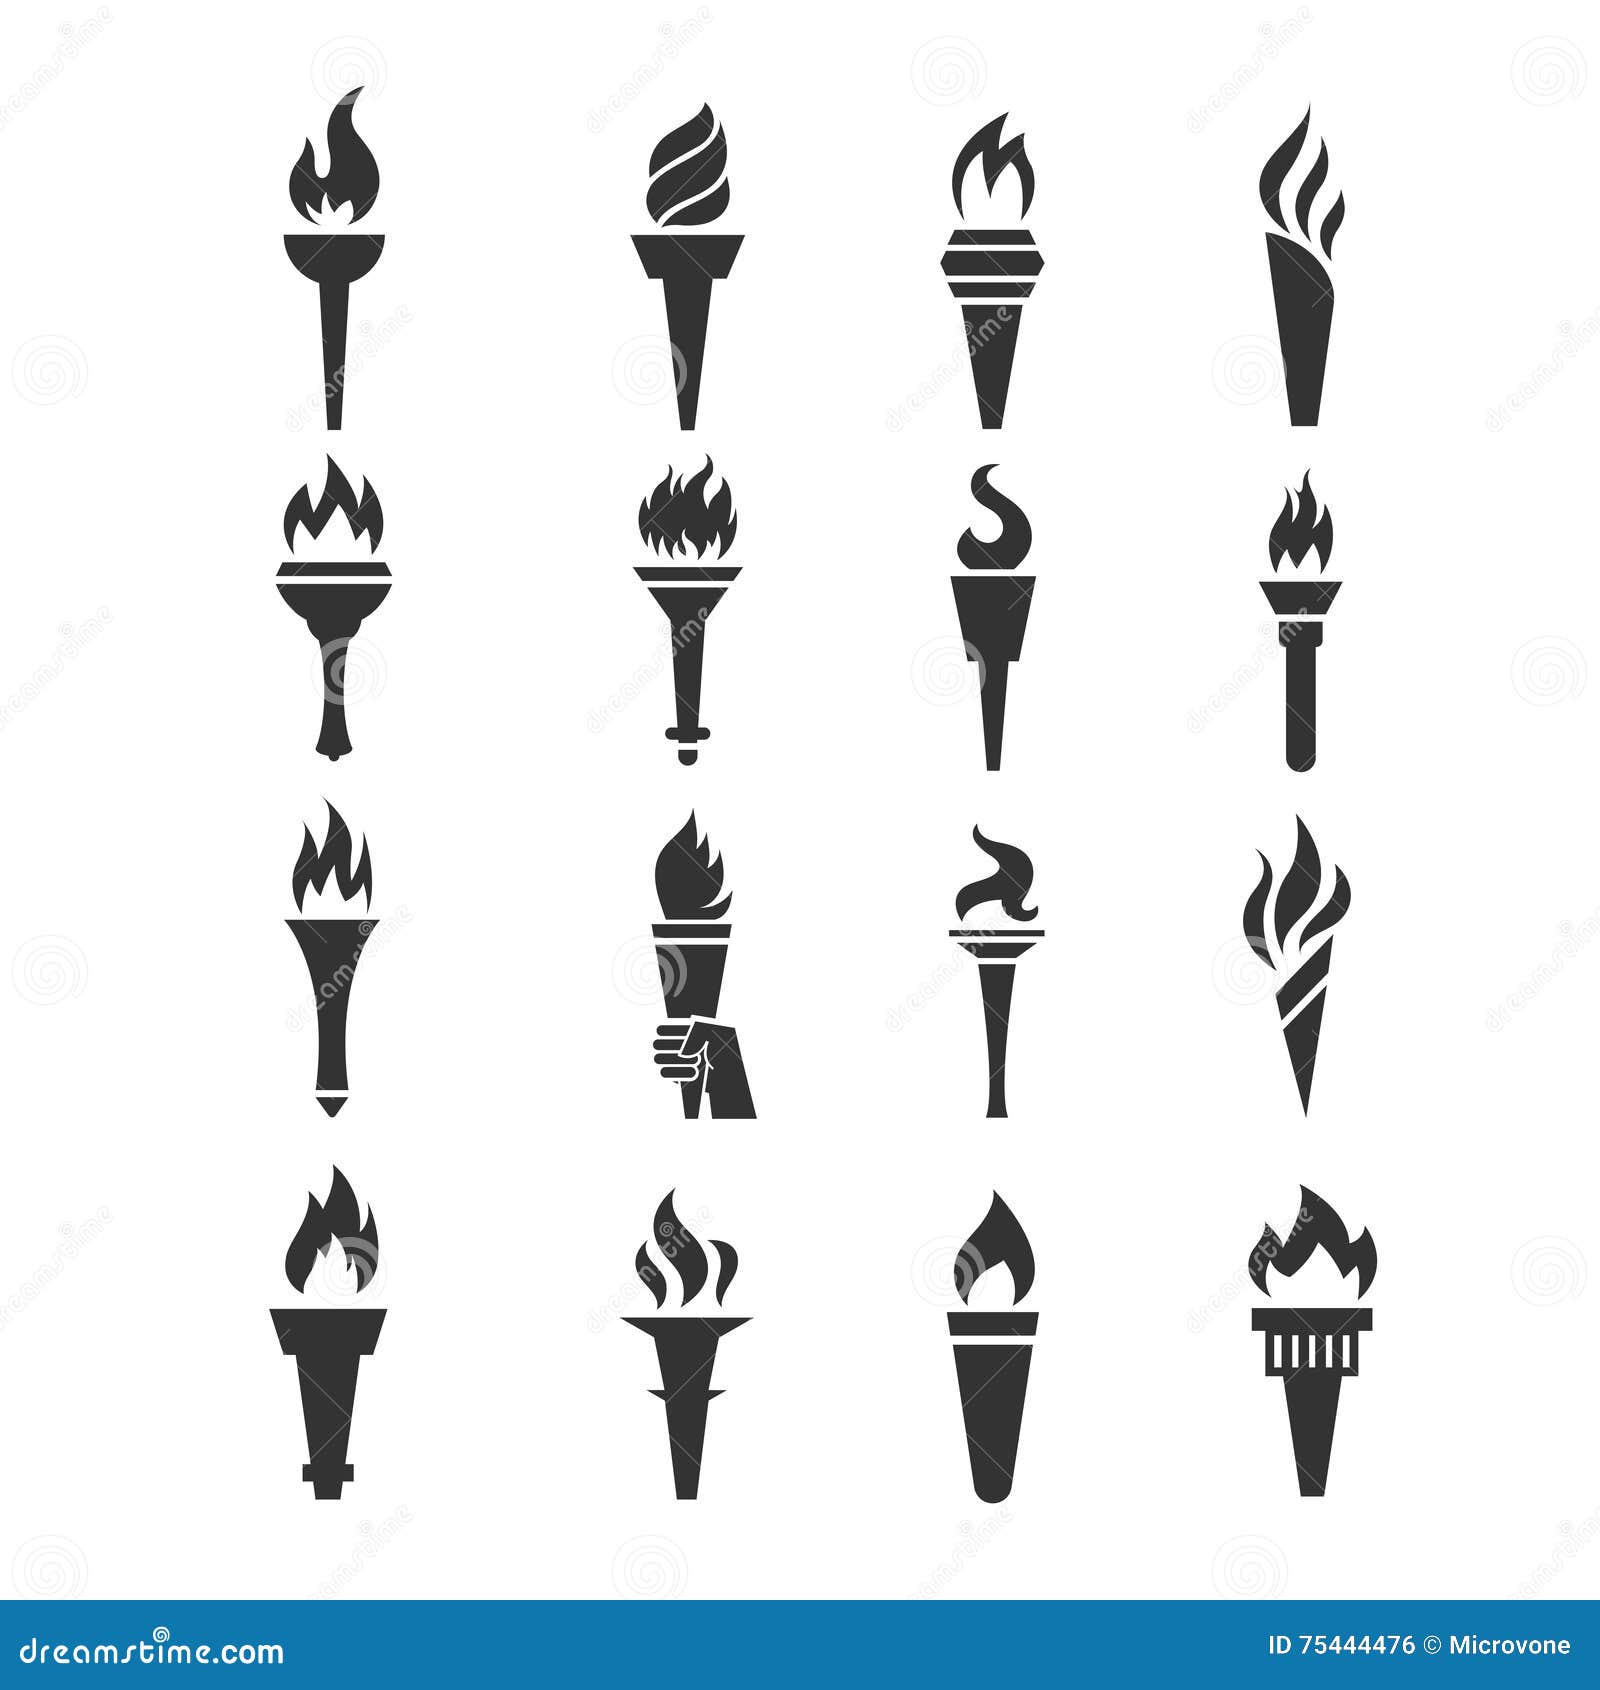 vector clipart torch - photo #20